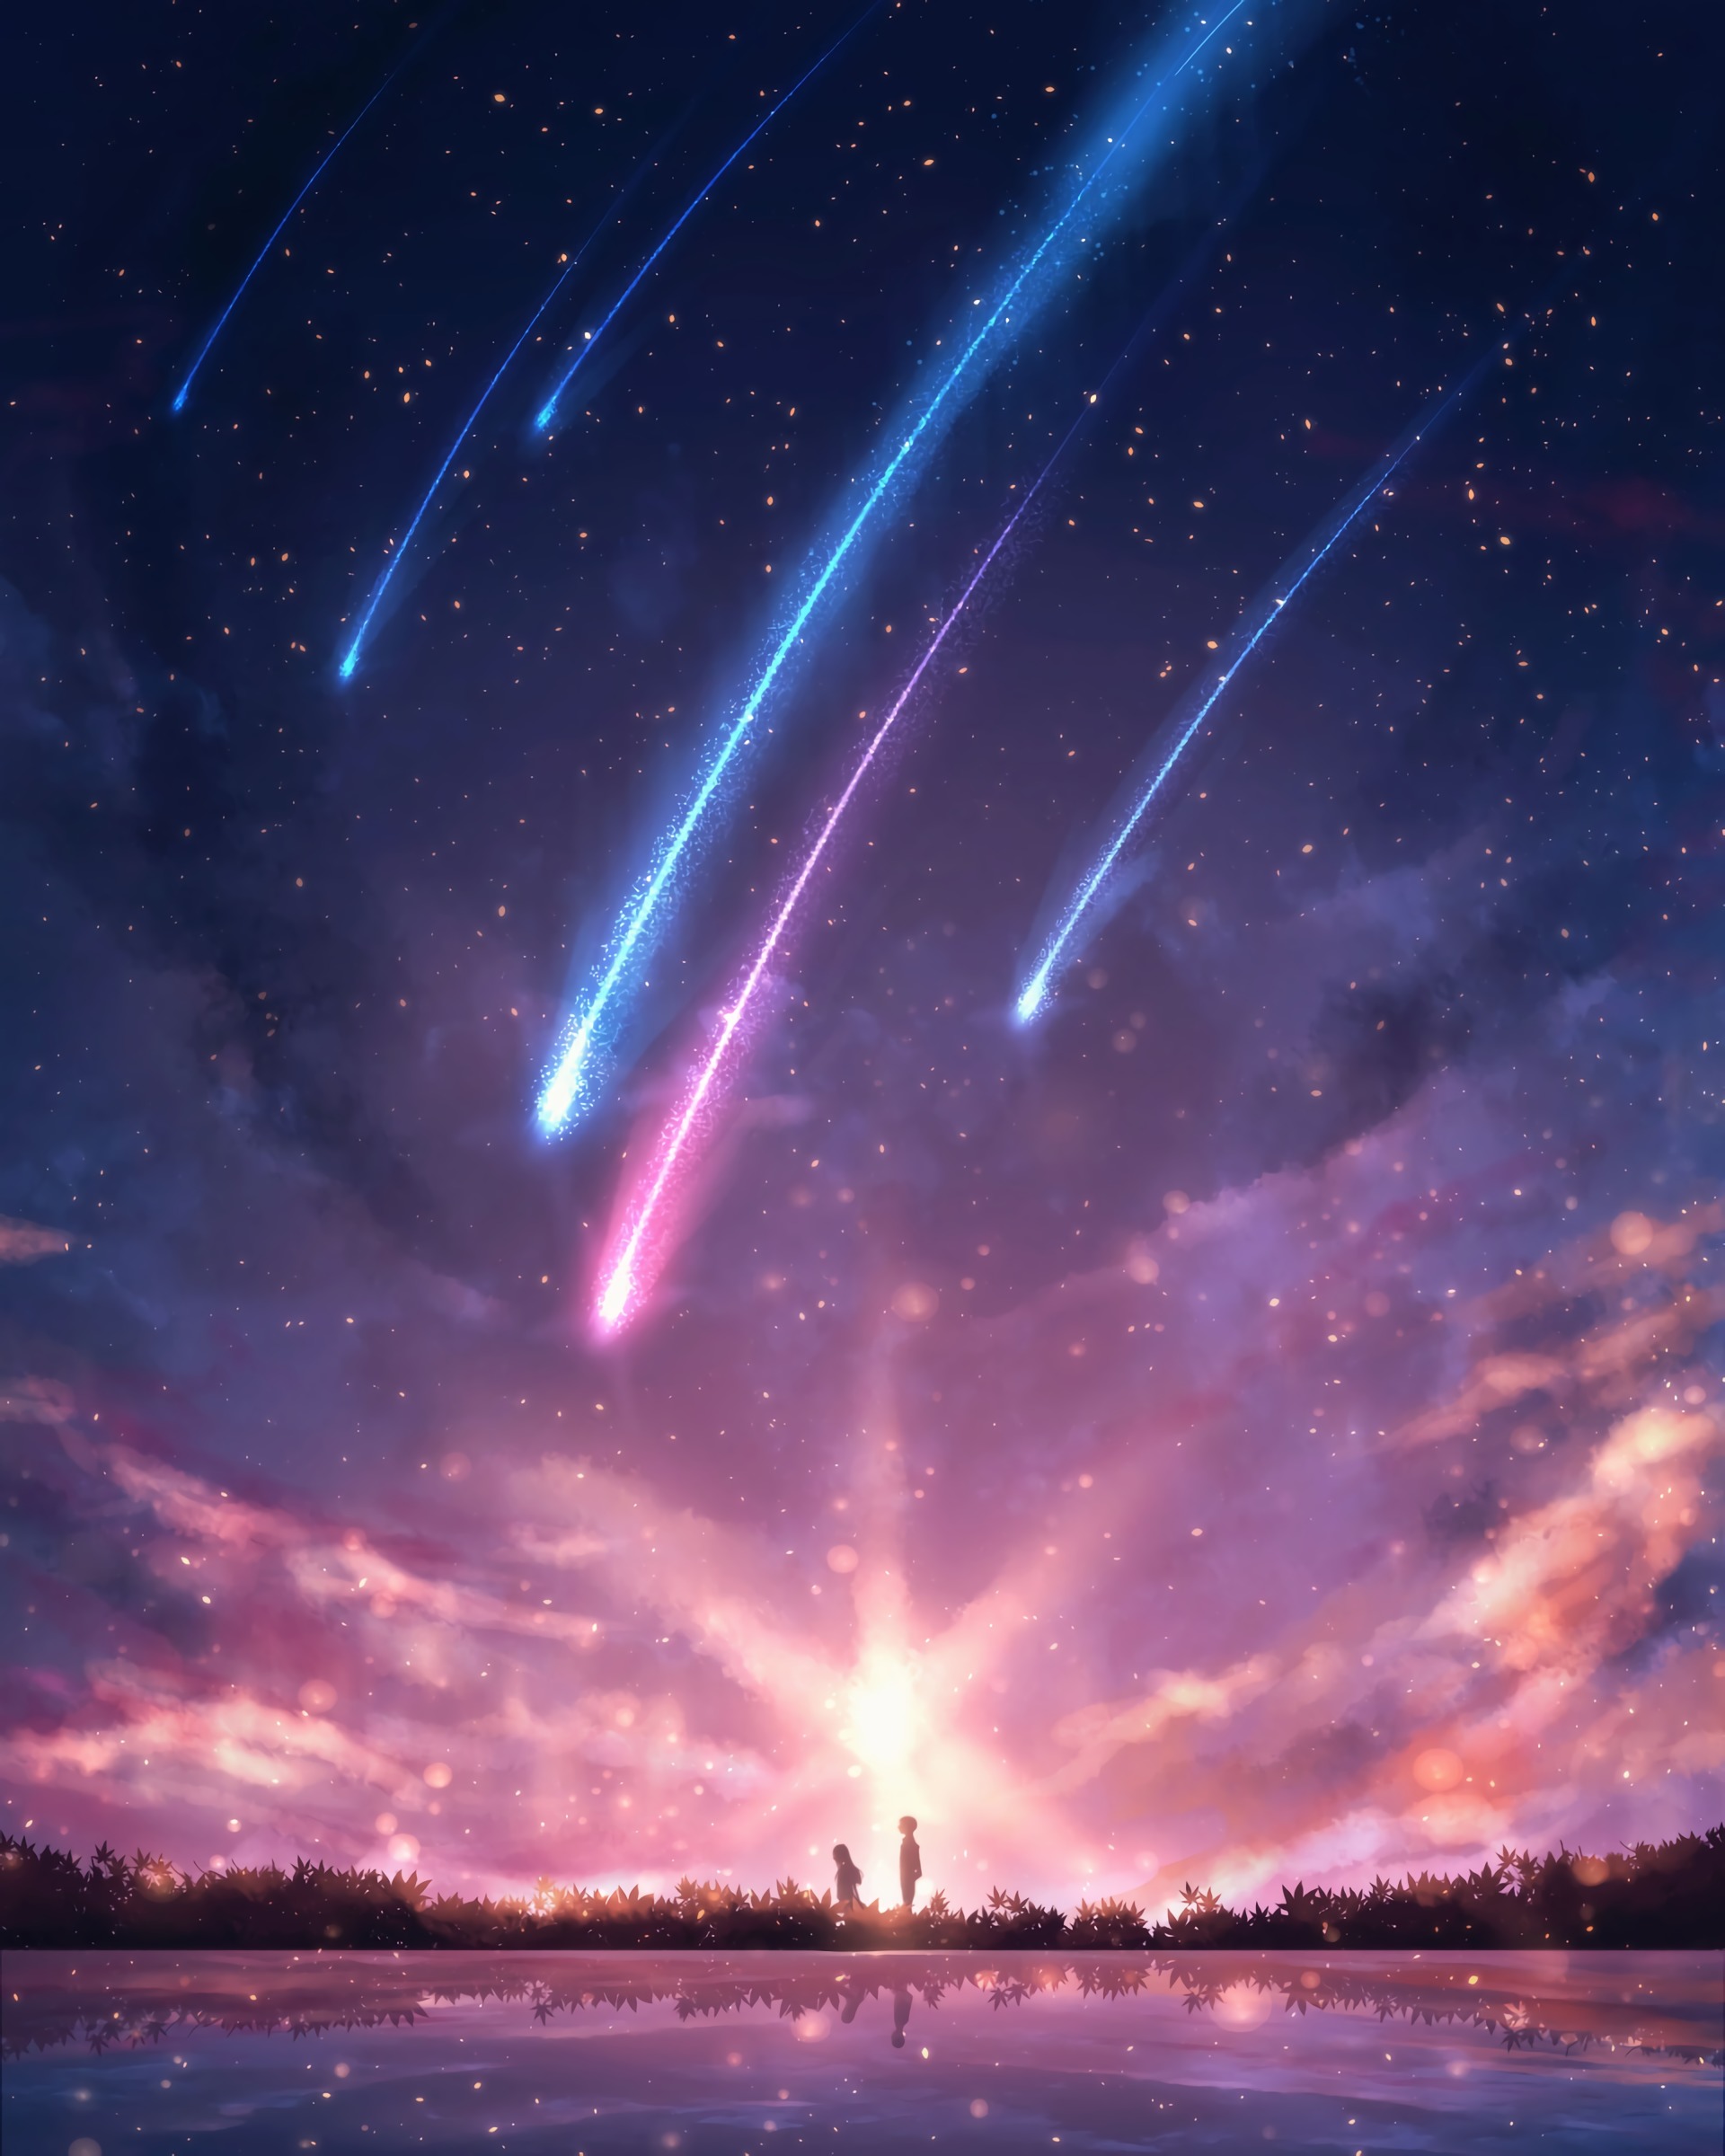 Anime Starry Purple Gradient Beautiful Background Wallpaper Image For Free  Download - Pngtree